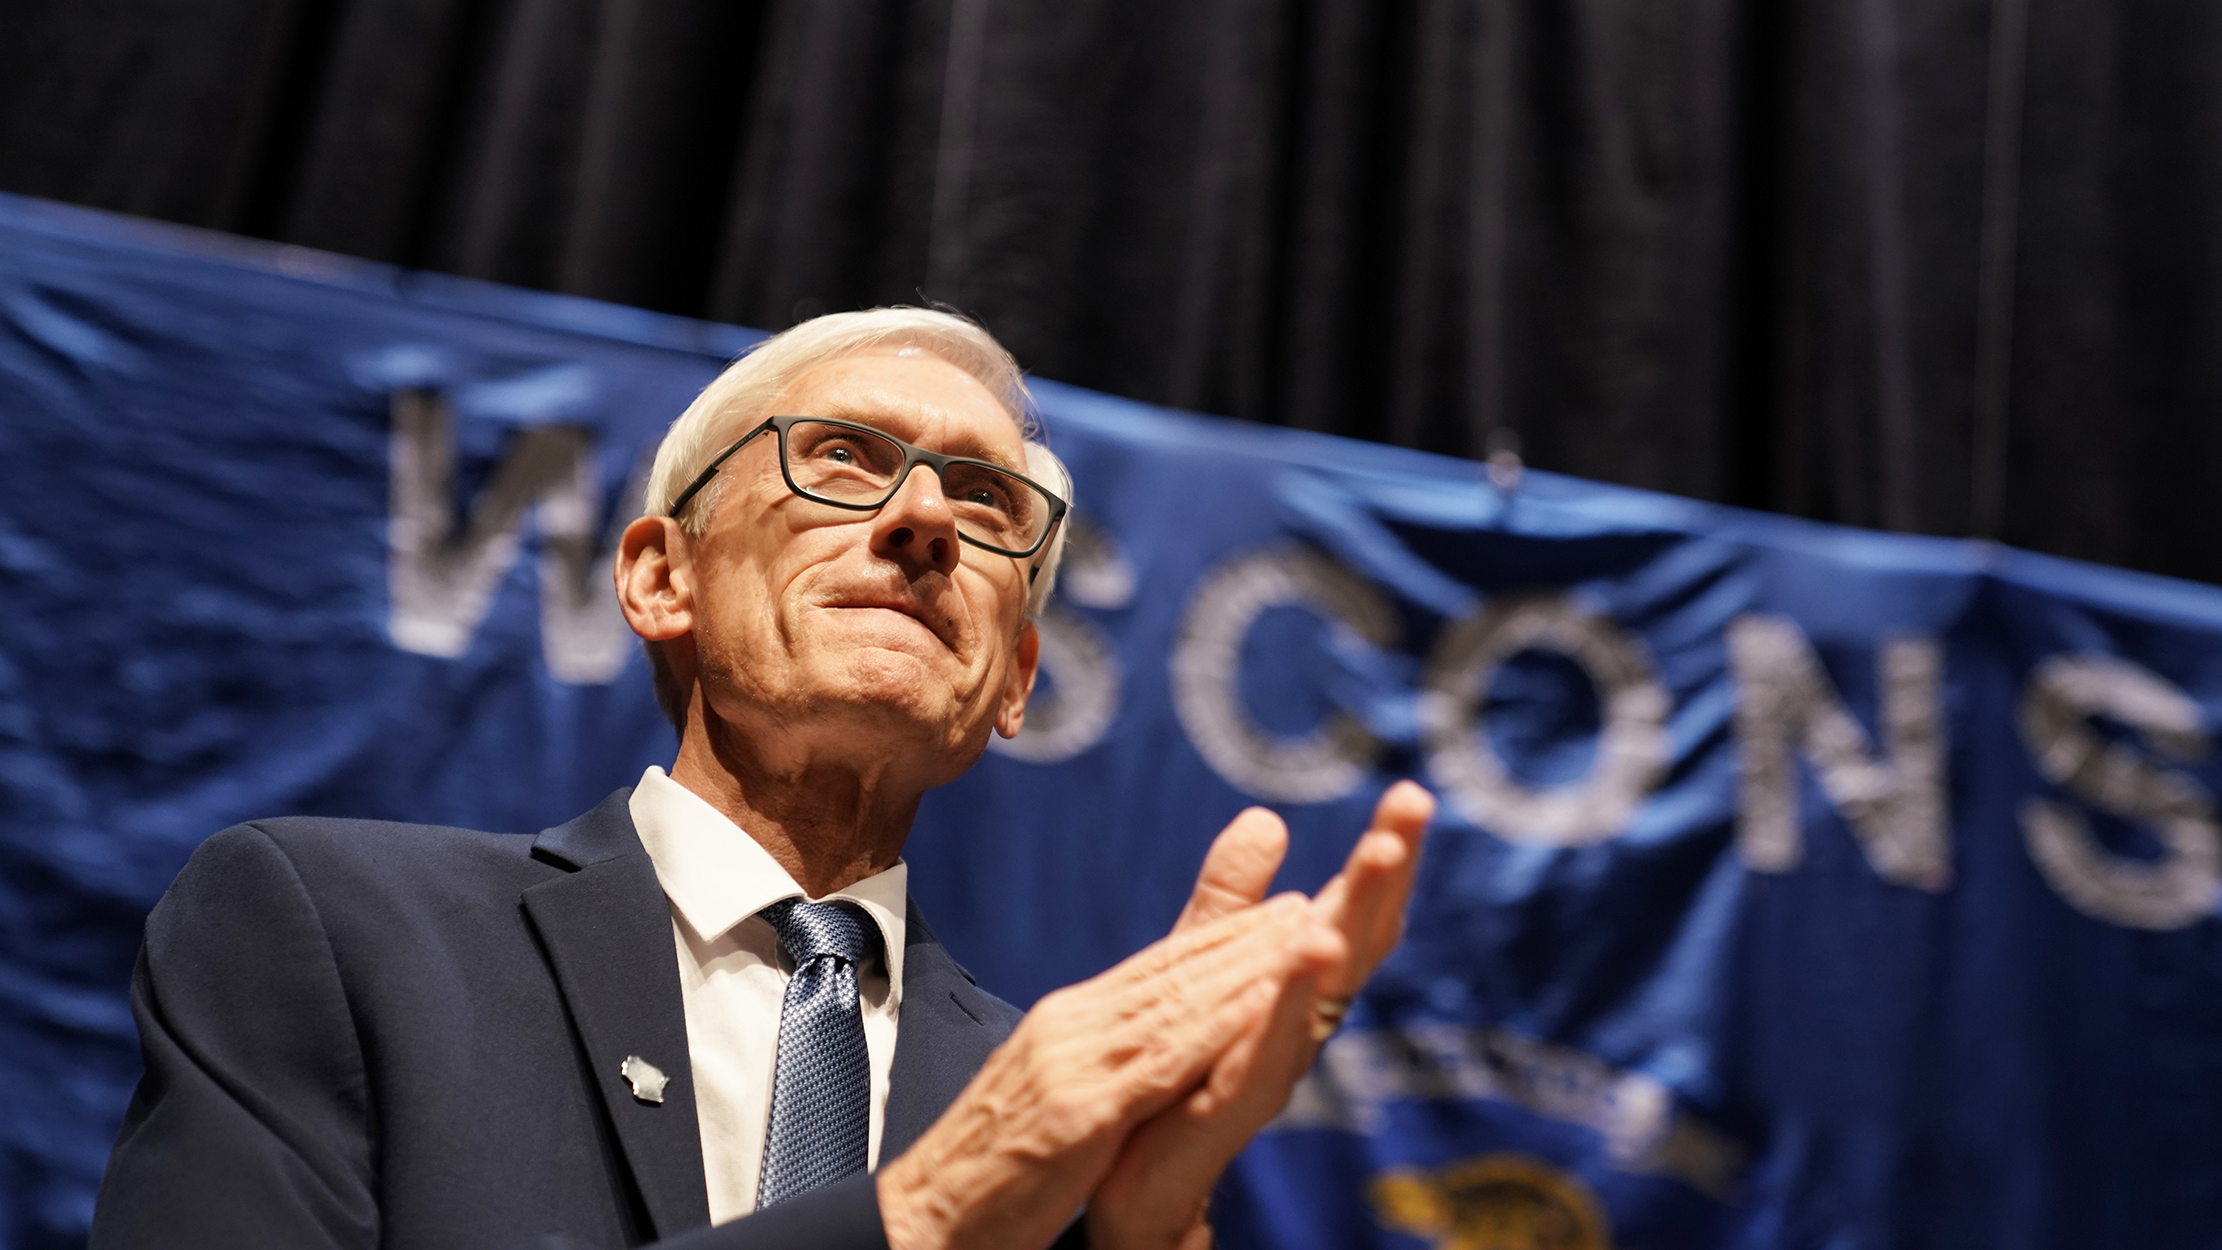 Democratic candidate for governor Tony Evers addresses supporters